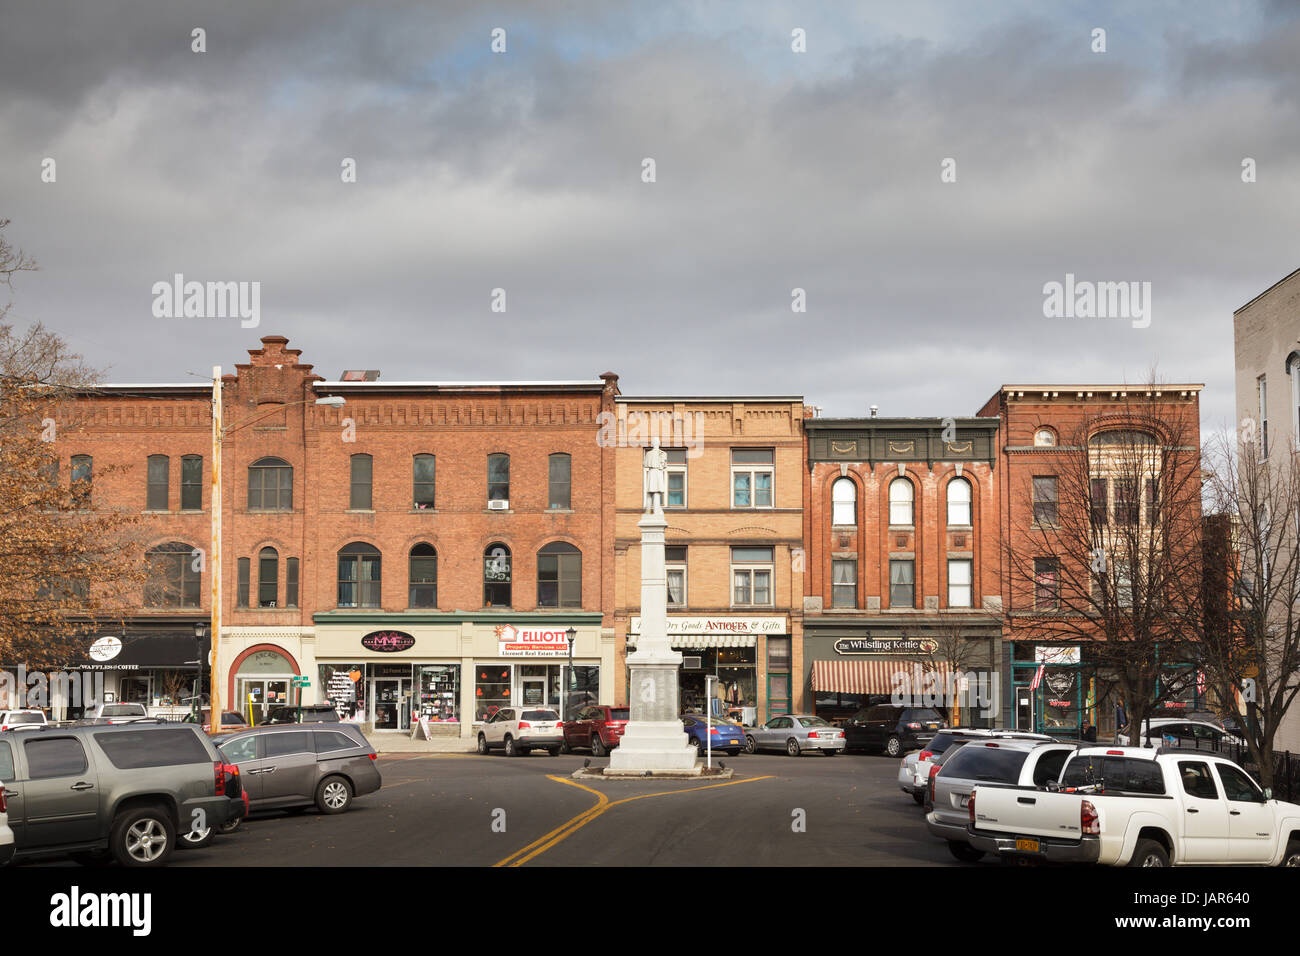 Business district of Ballston Spa, a village in Saratoga County, New York Stock Photo